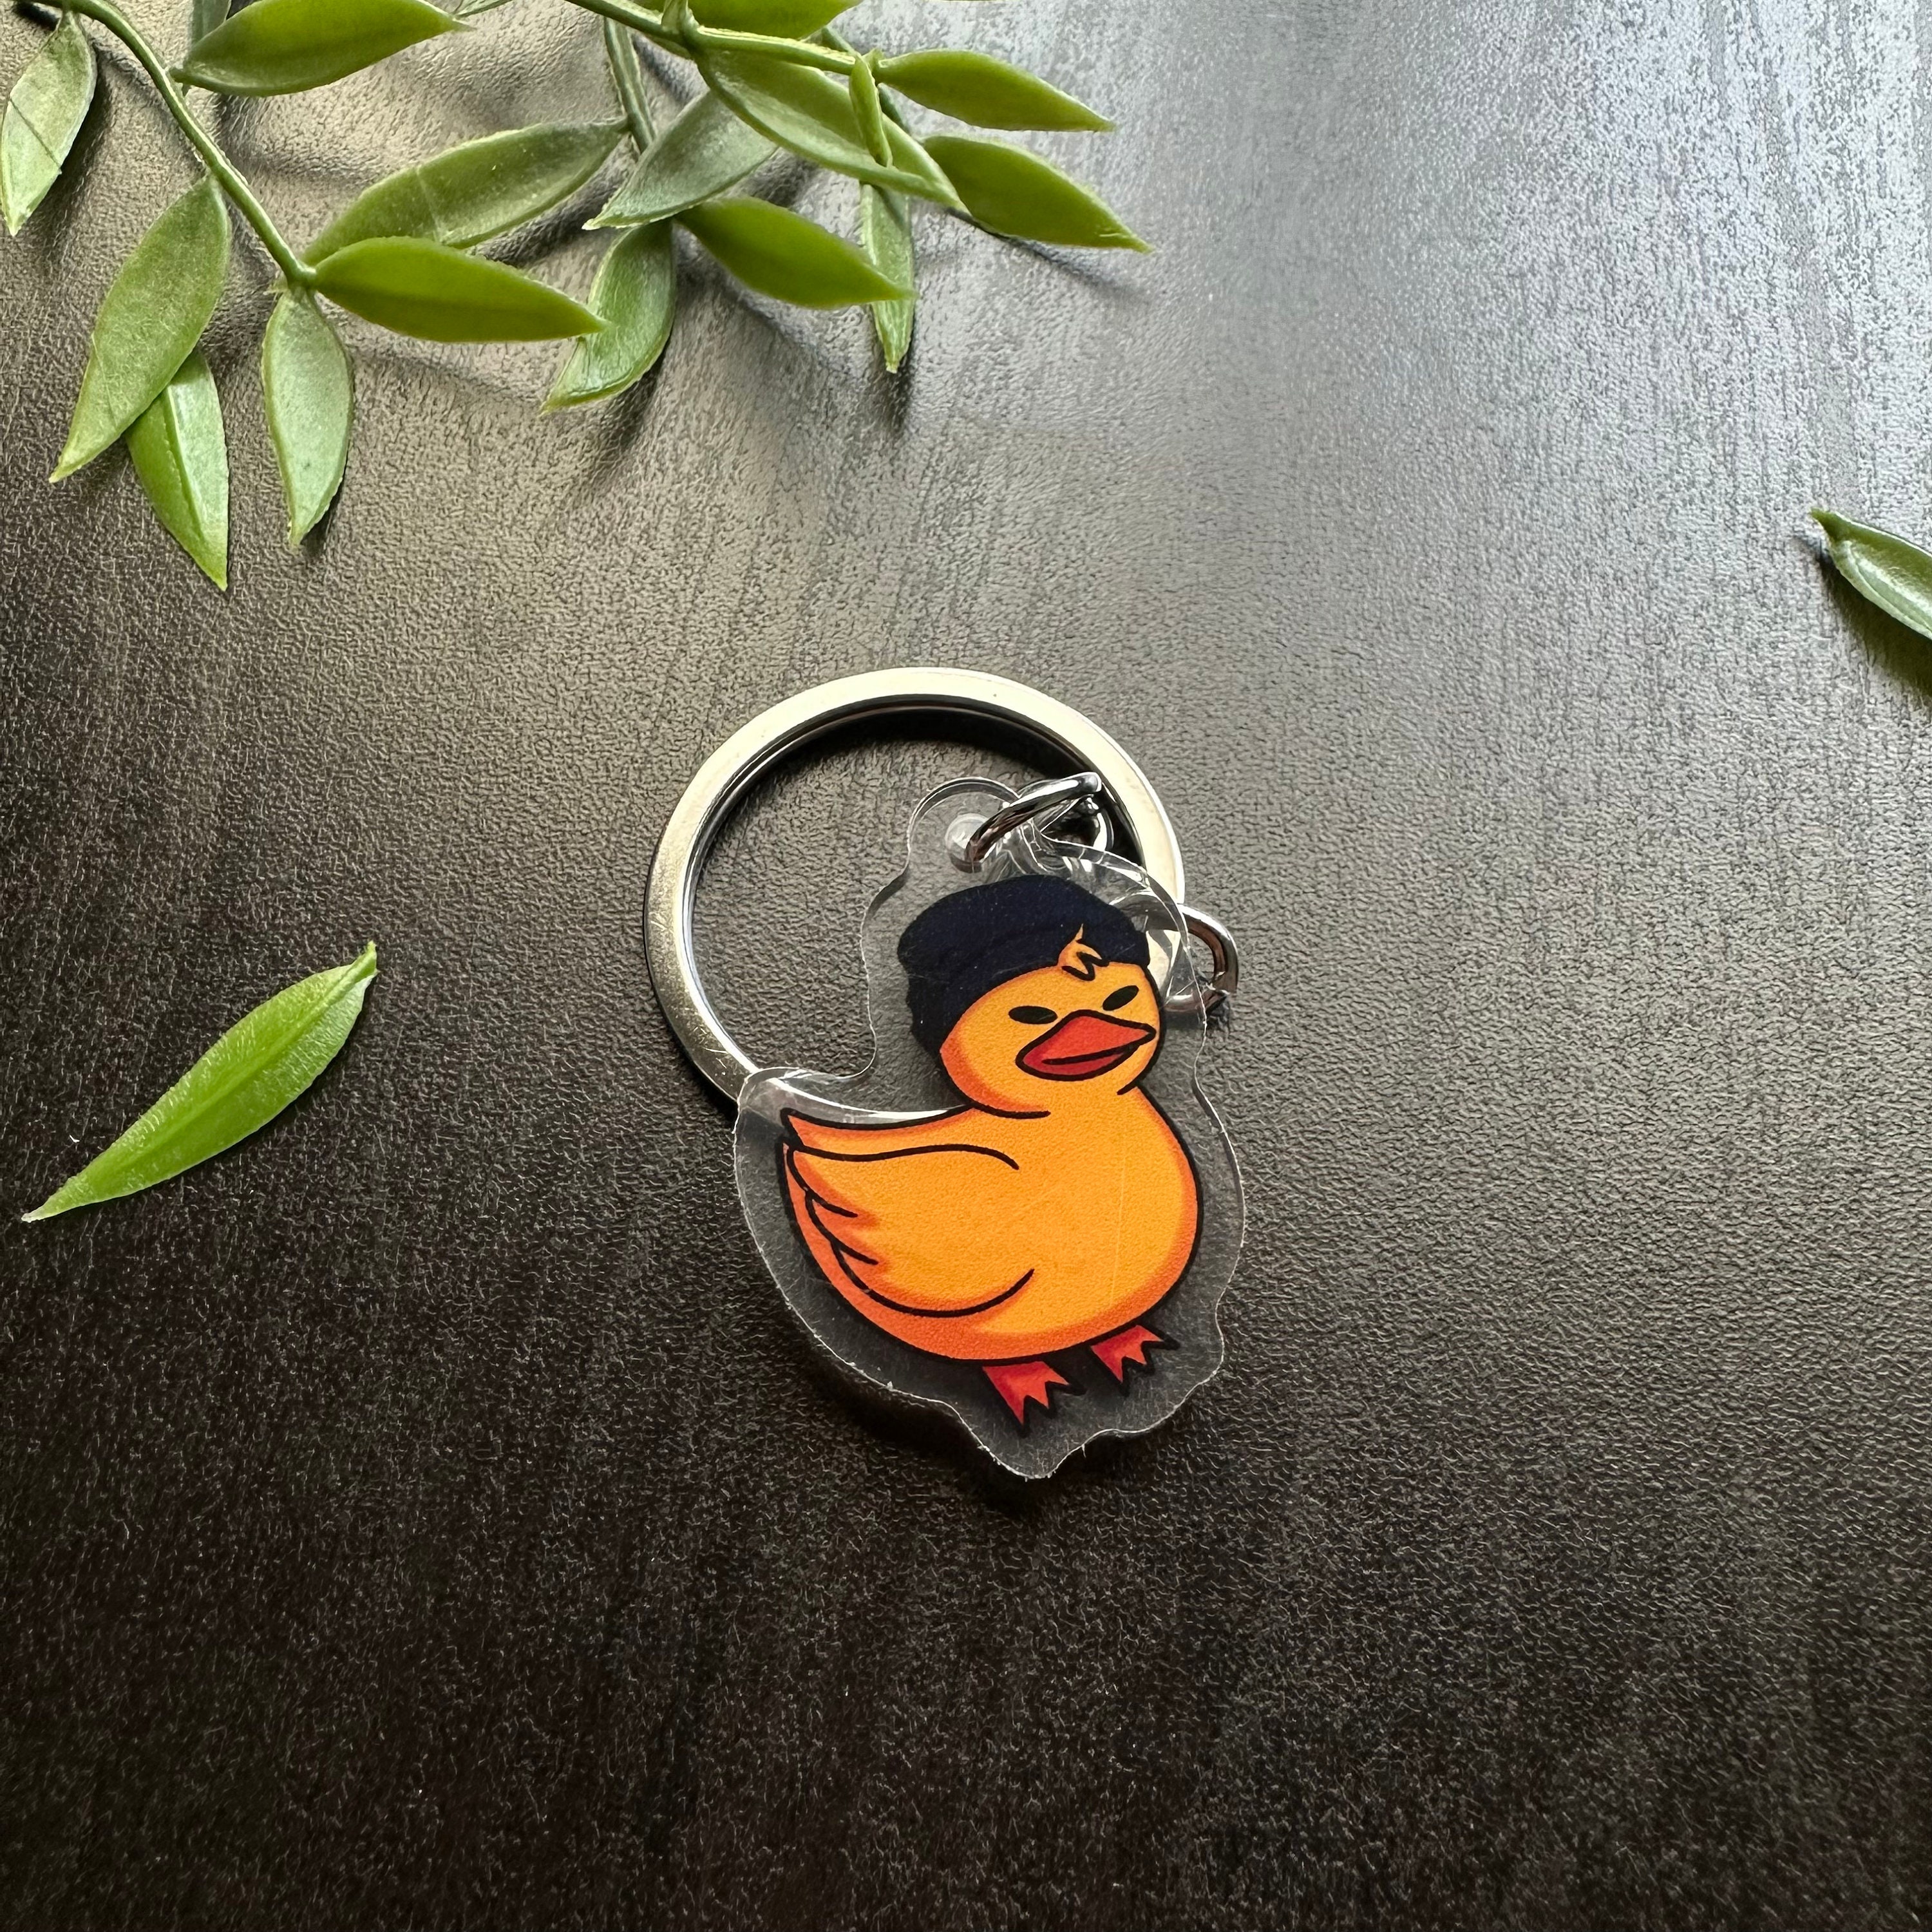 Quackity & Fundy Minecraft Skin Keychain/magnet Dream SMP 